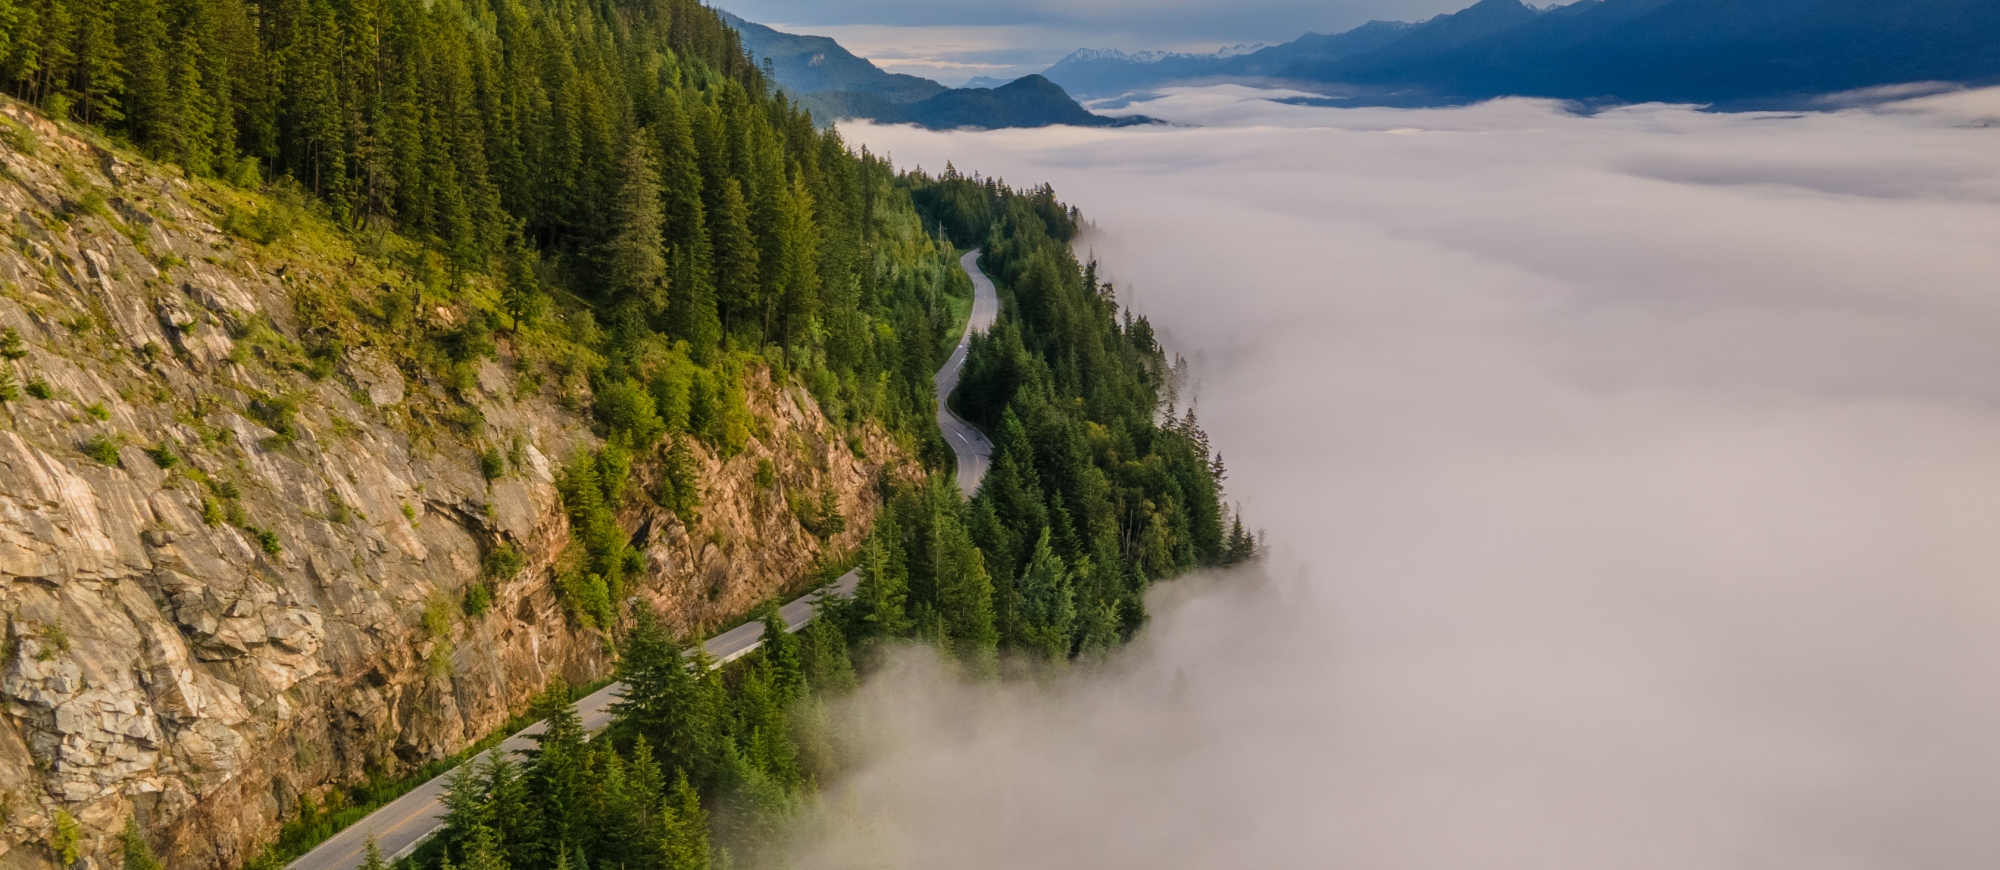 Winding highway between a foggy lake and mountains